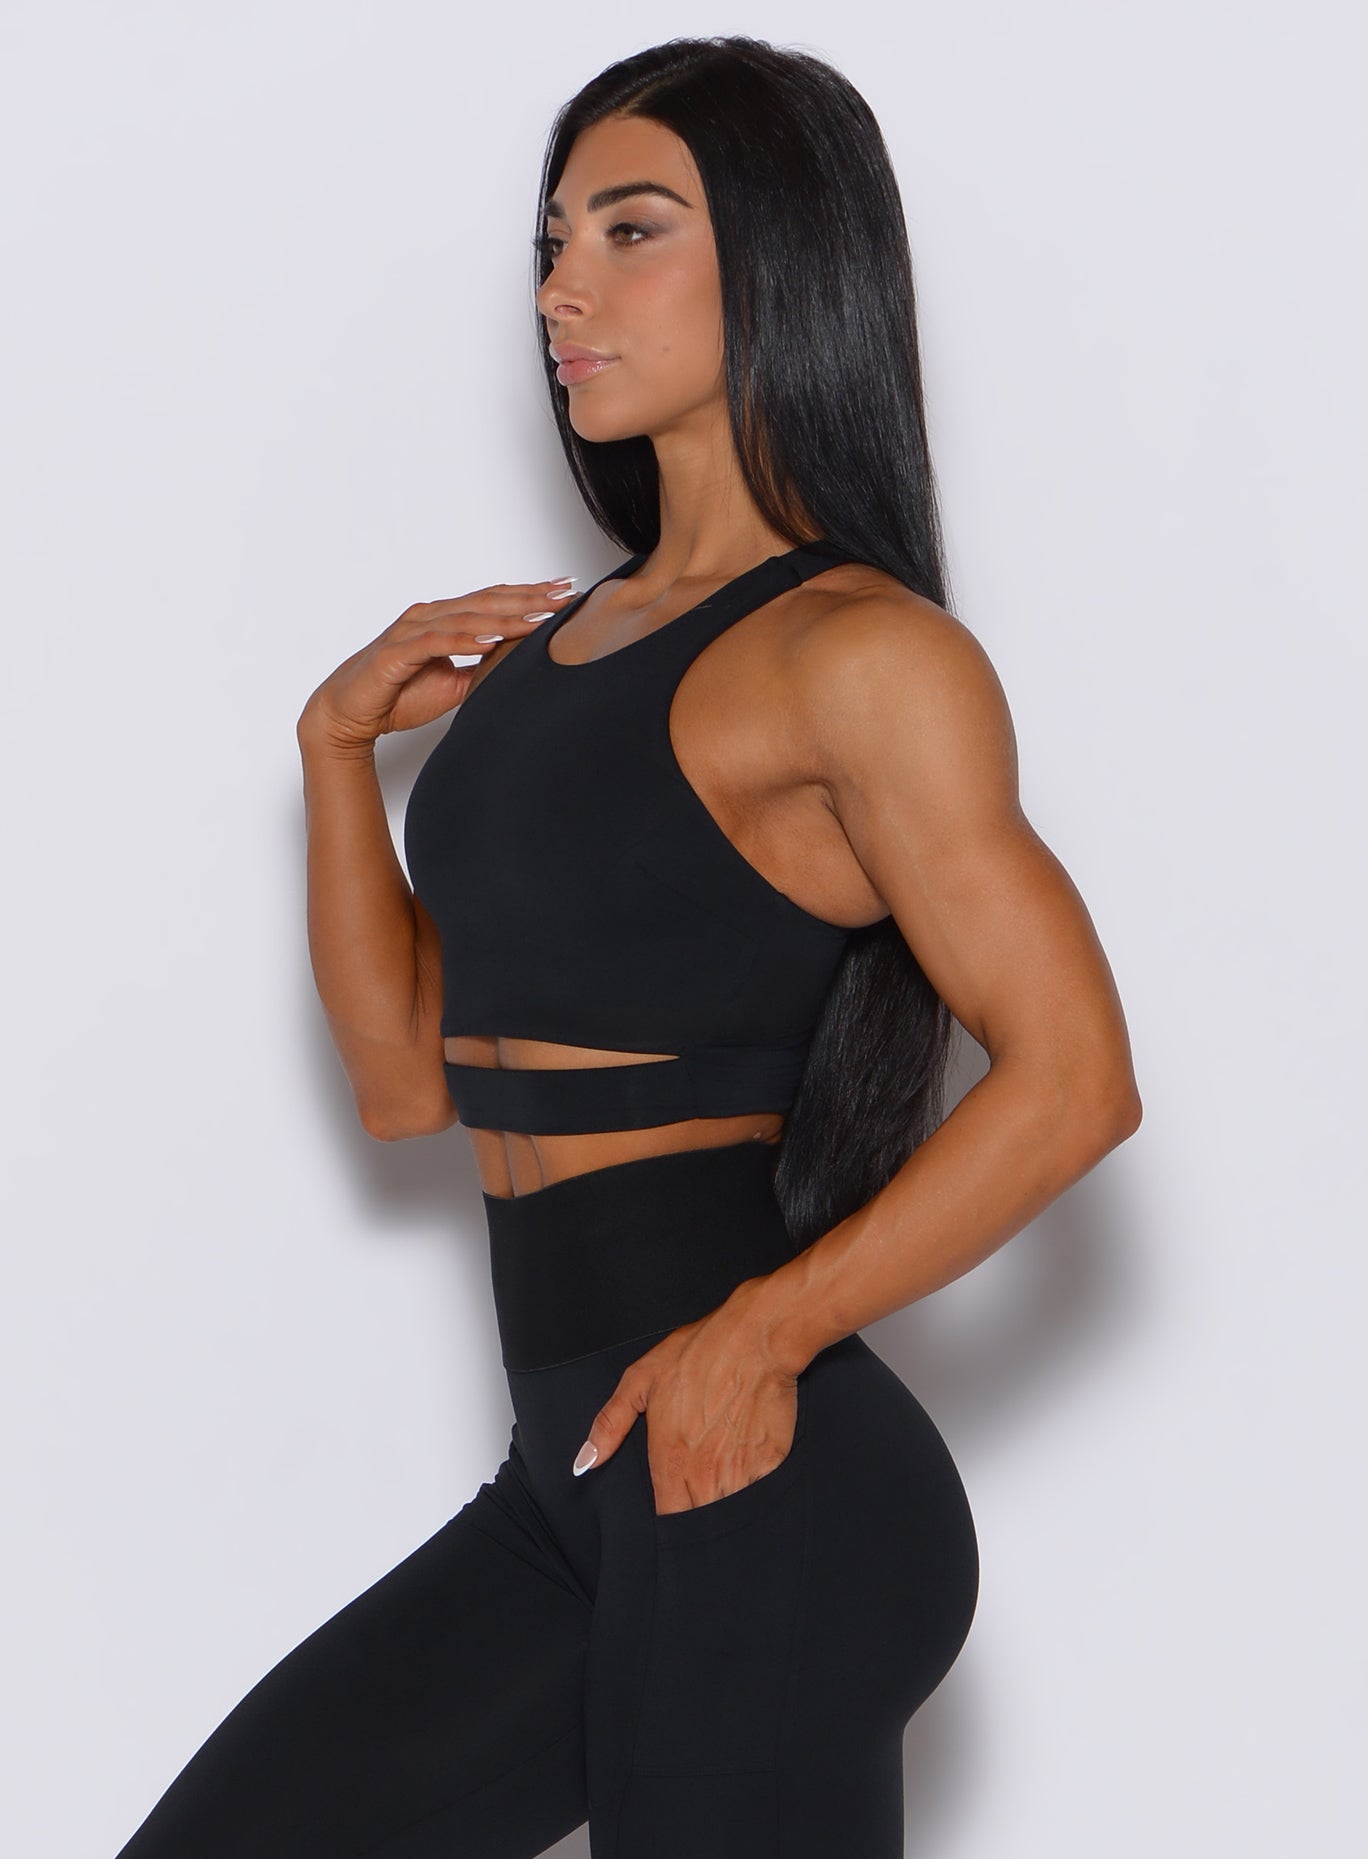 Left side profile view of a model wearing our black sliced tank bra along with a matching leggings